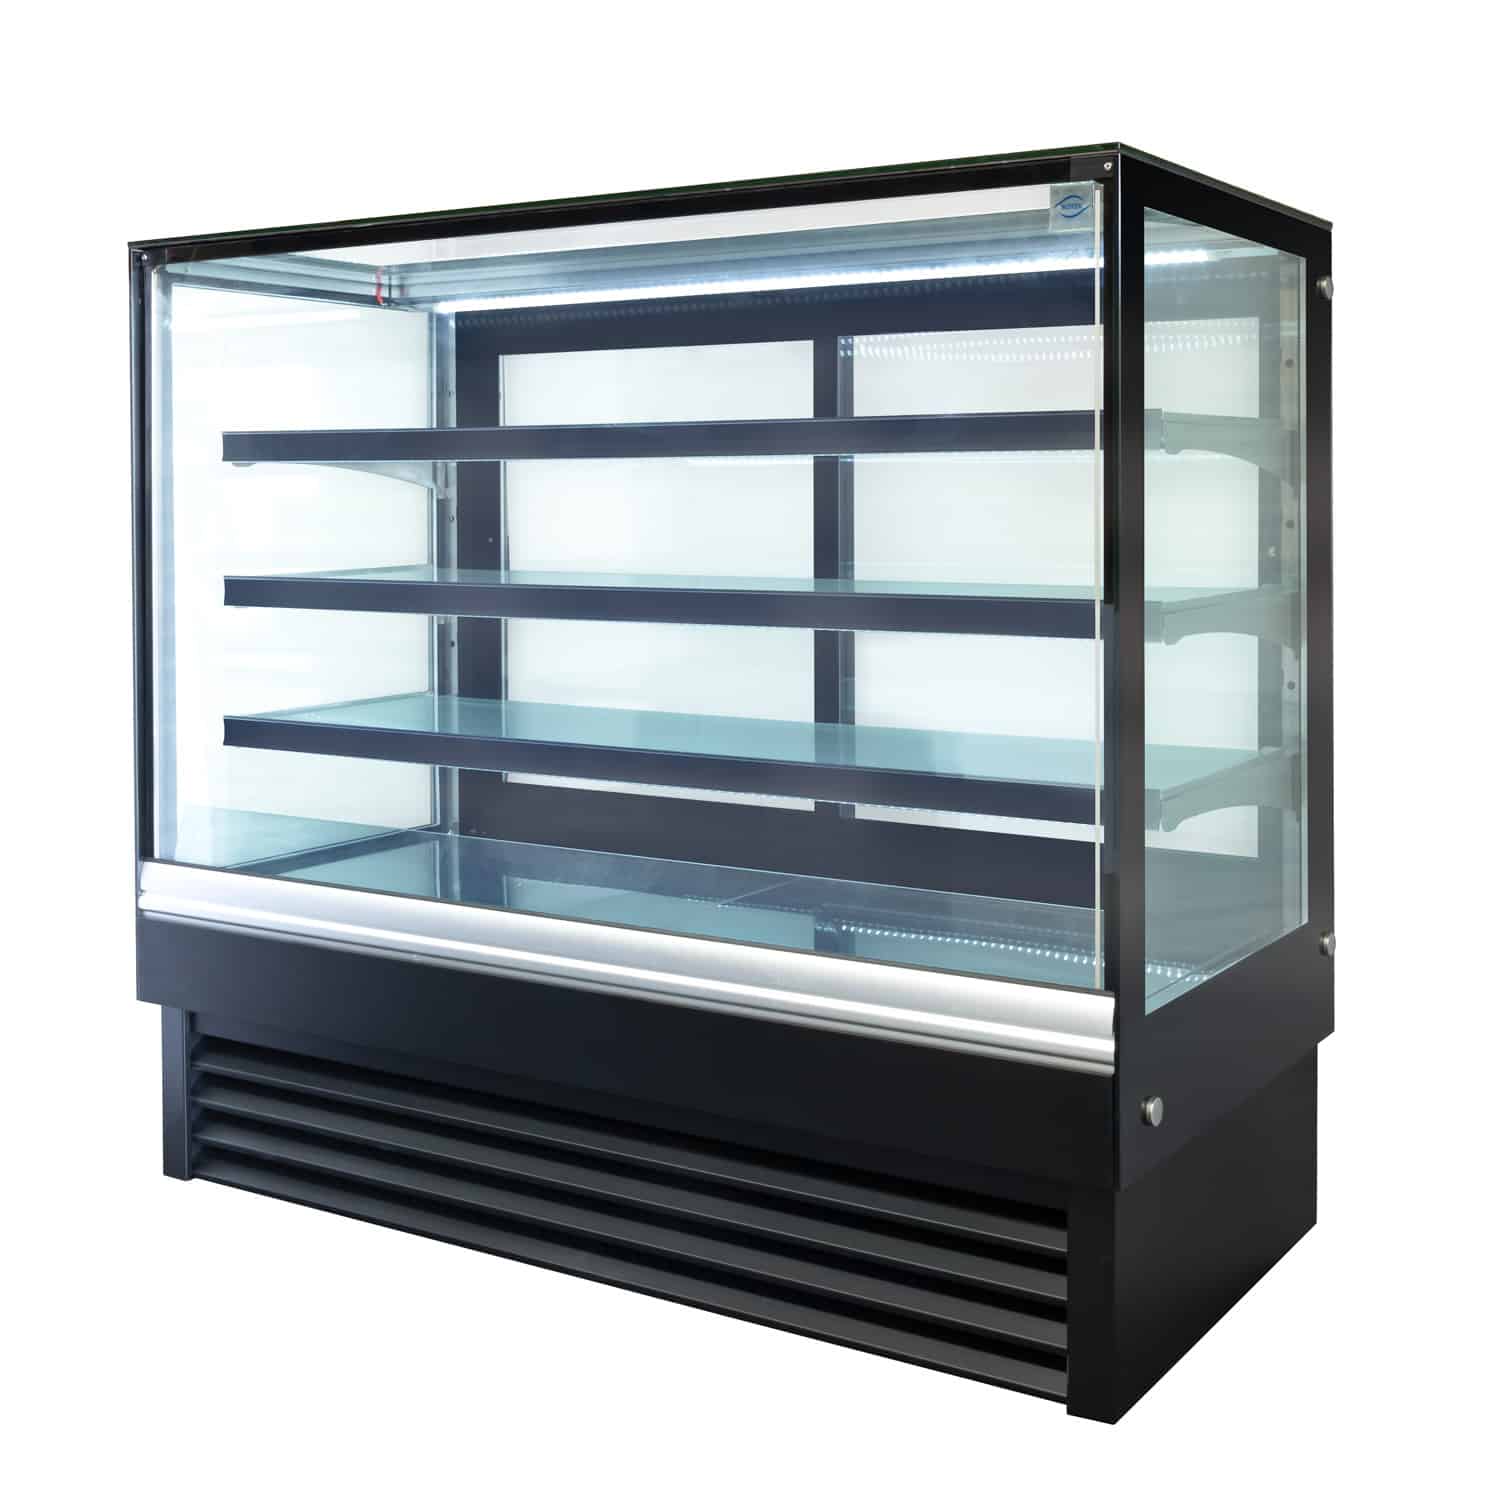 Norsk Cake Display Fridge 1500mm wide angled view